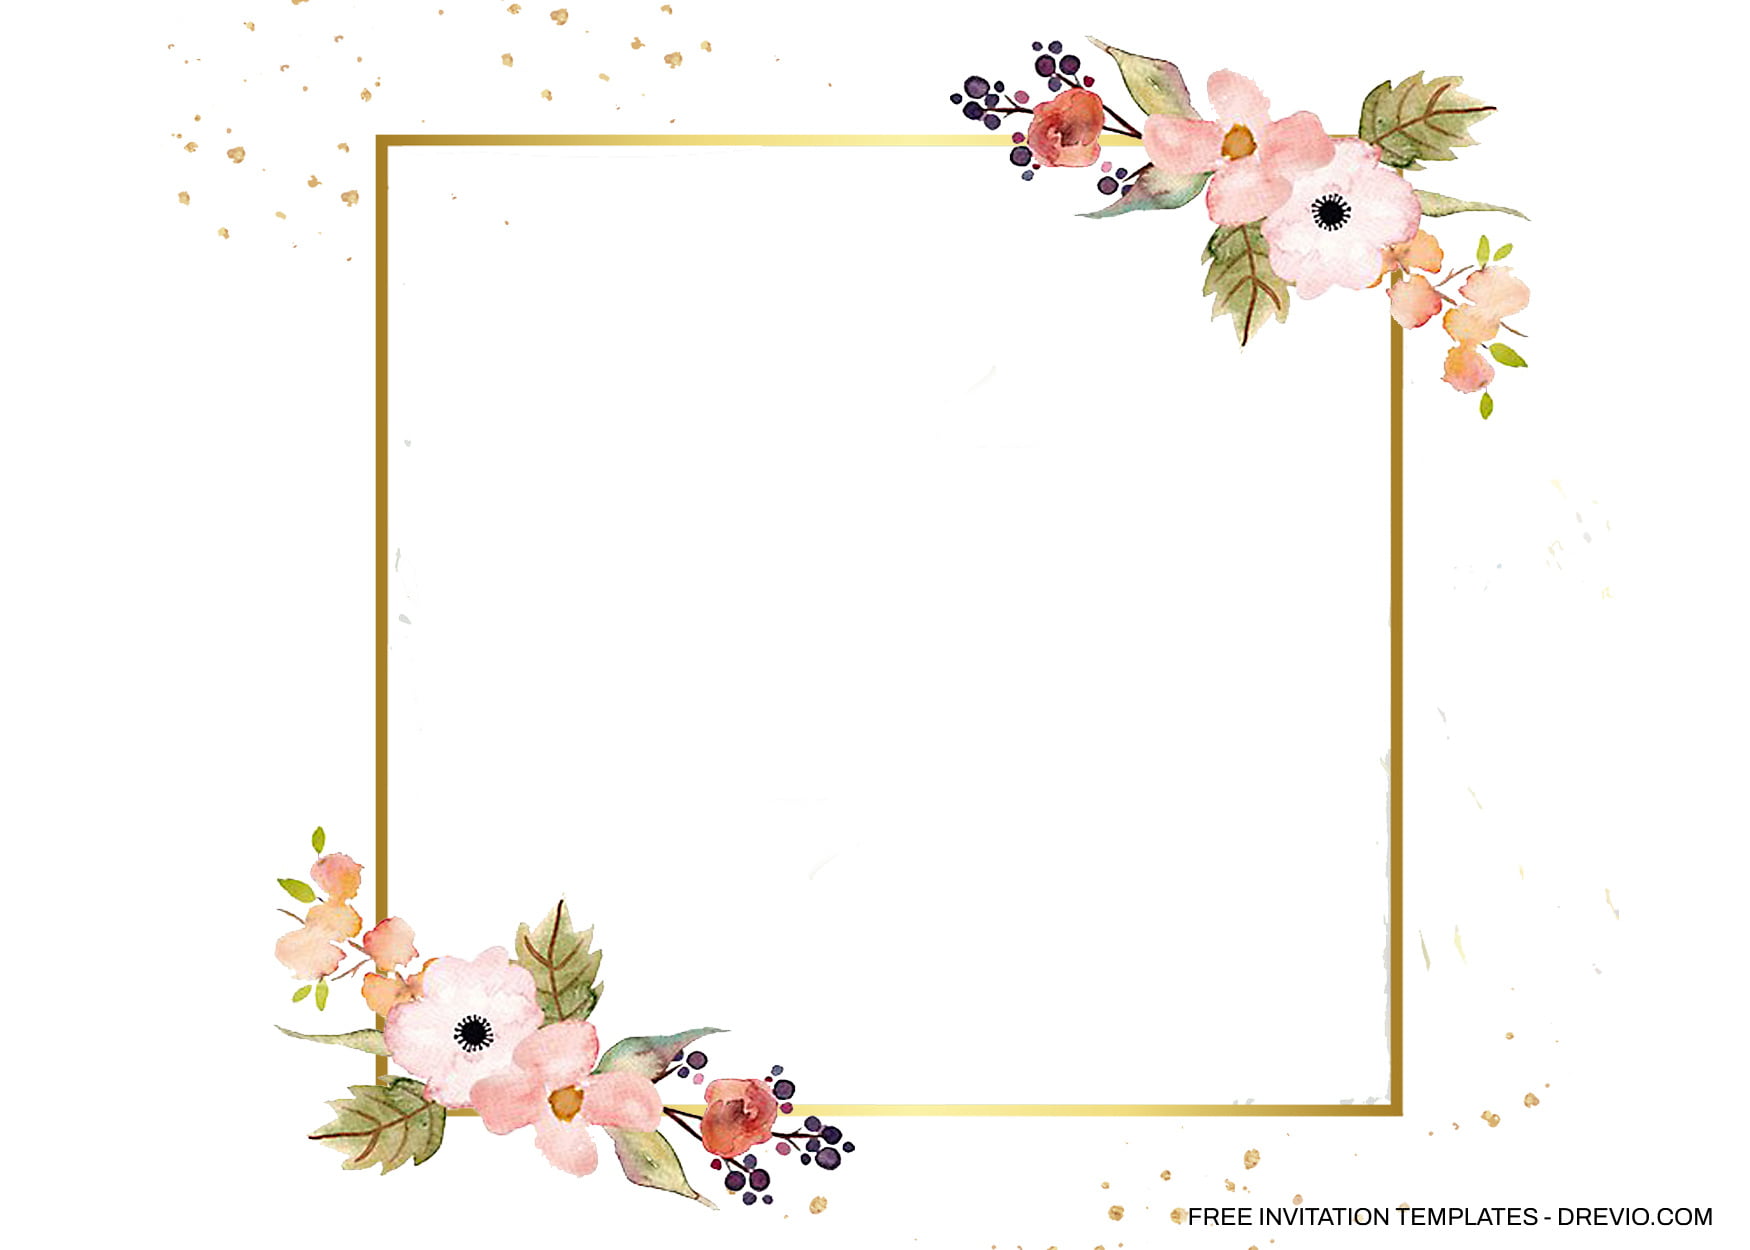 7+ Tribal Floral Bouquet For Invitation Templates